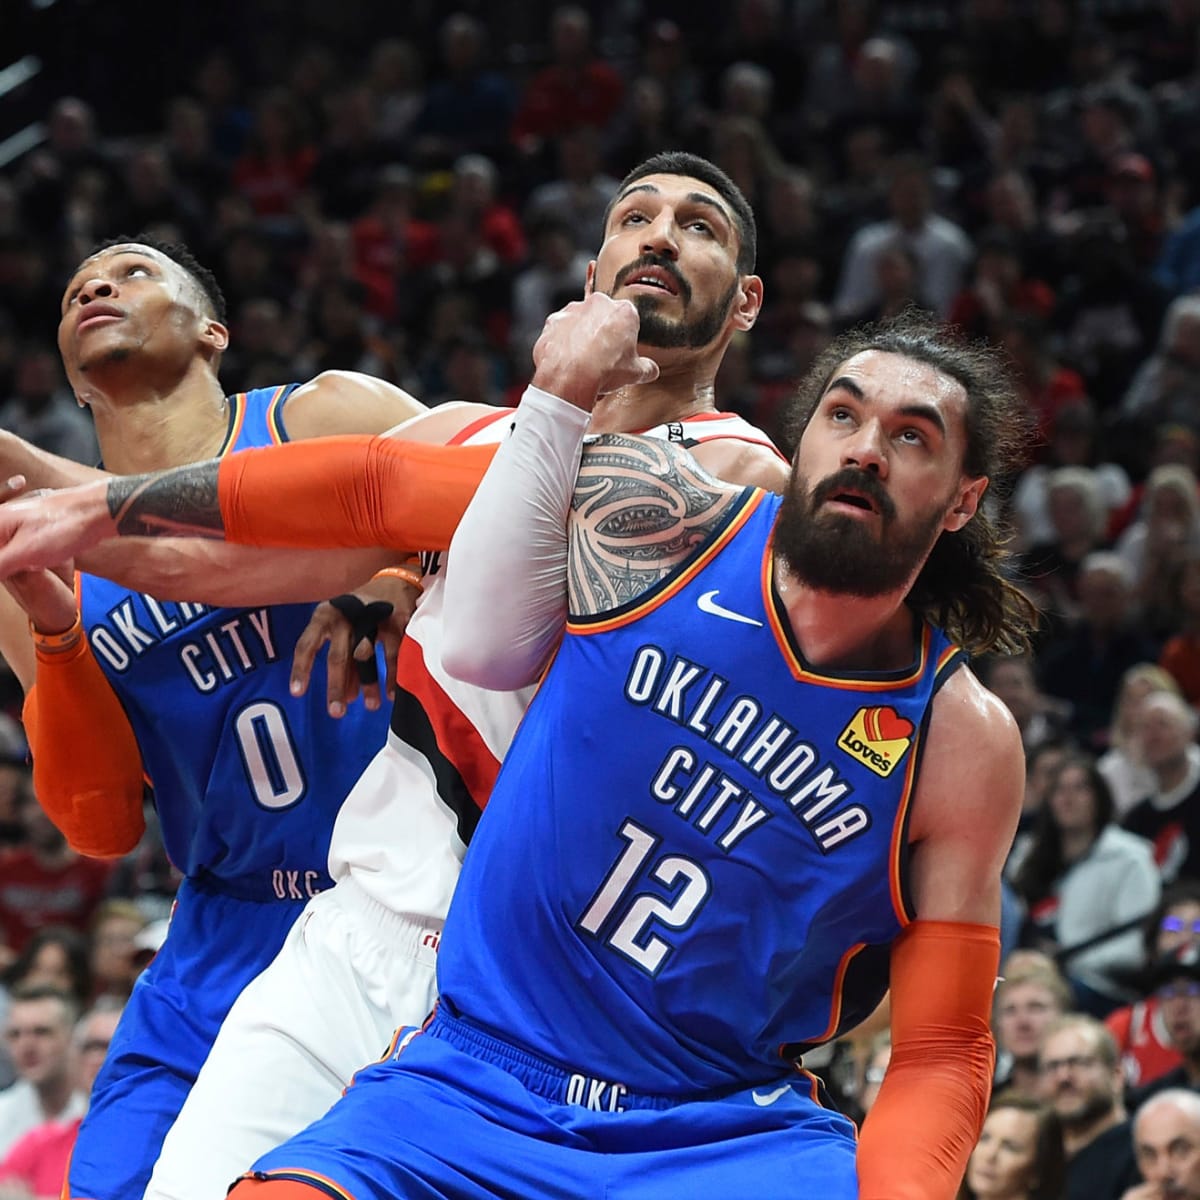 Don't Mess with Steven Adams! - Career Heated Moments 